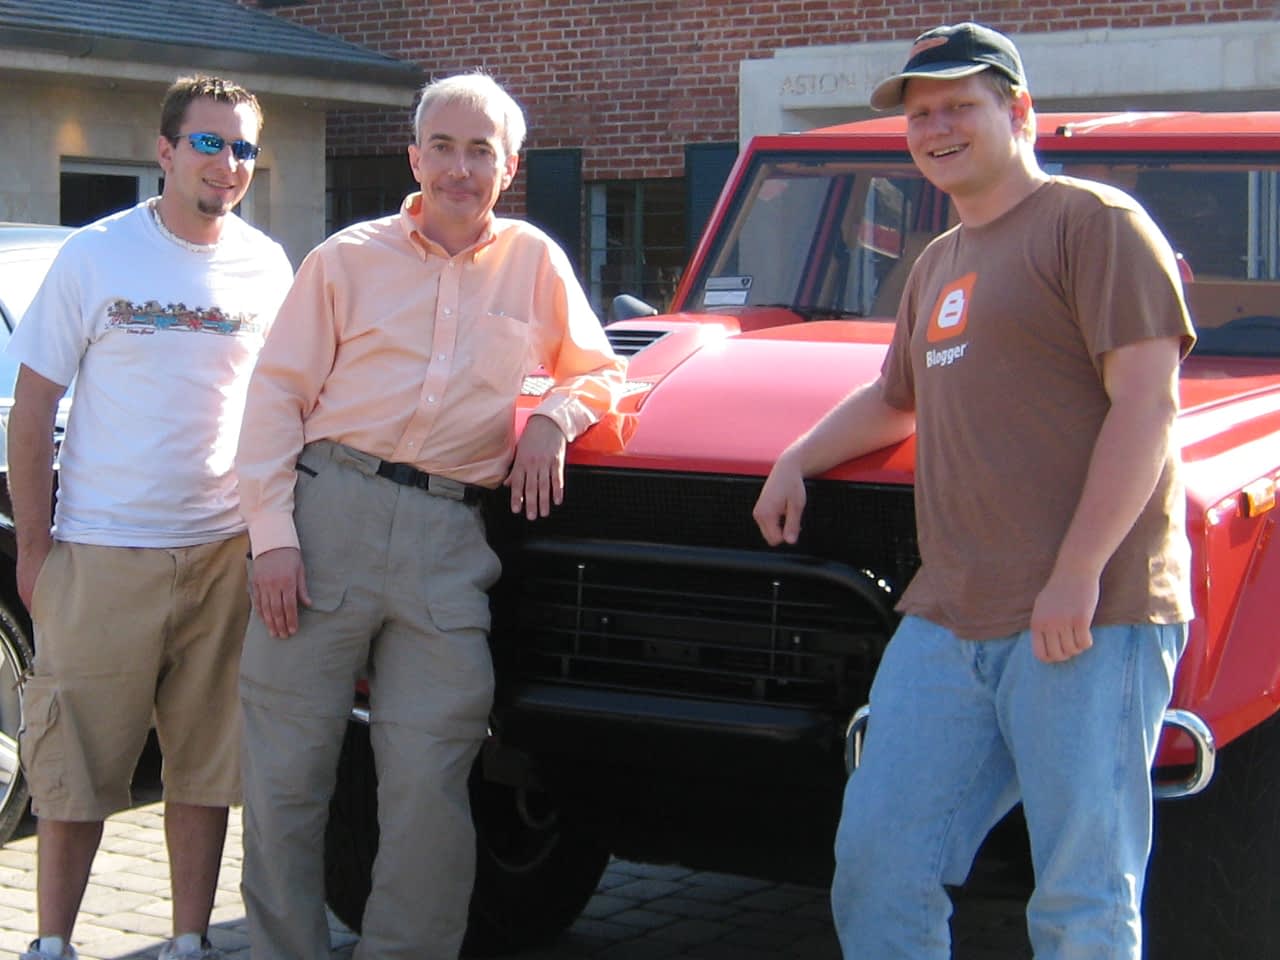 Mike, Dr. Warner, and Patrick in front of Lamborghini LM002